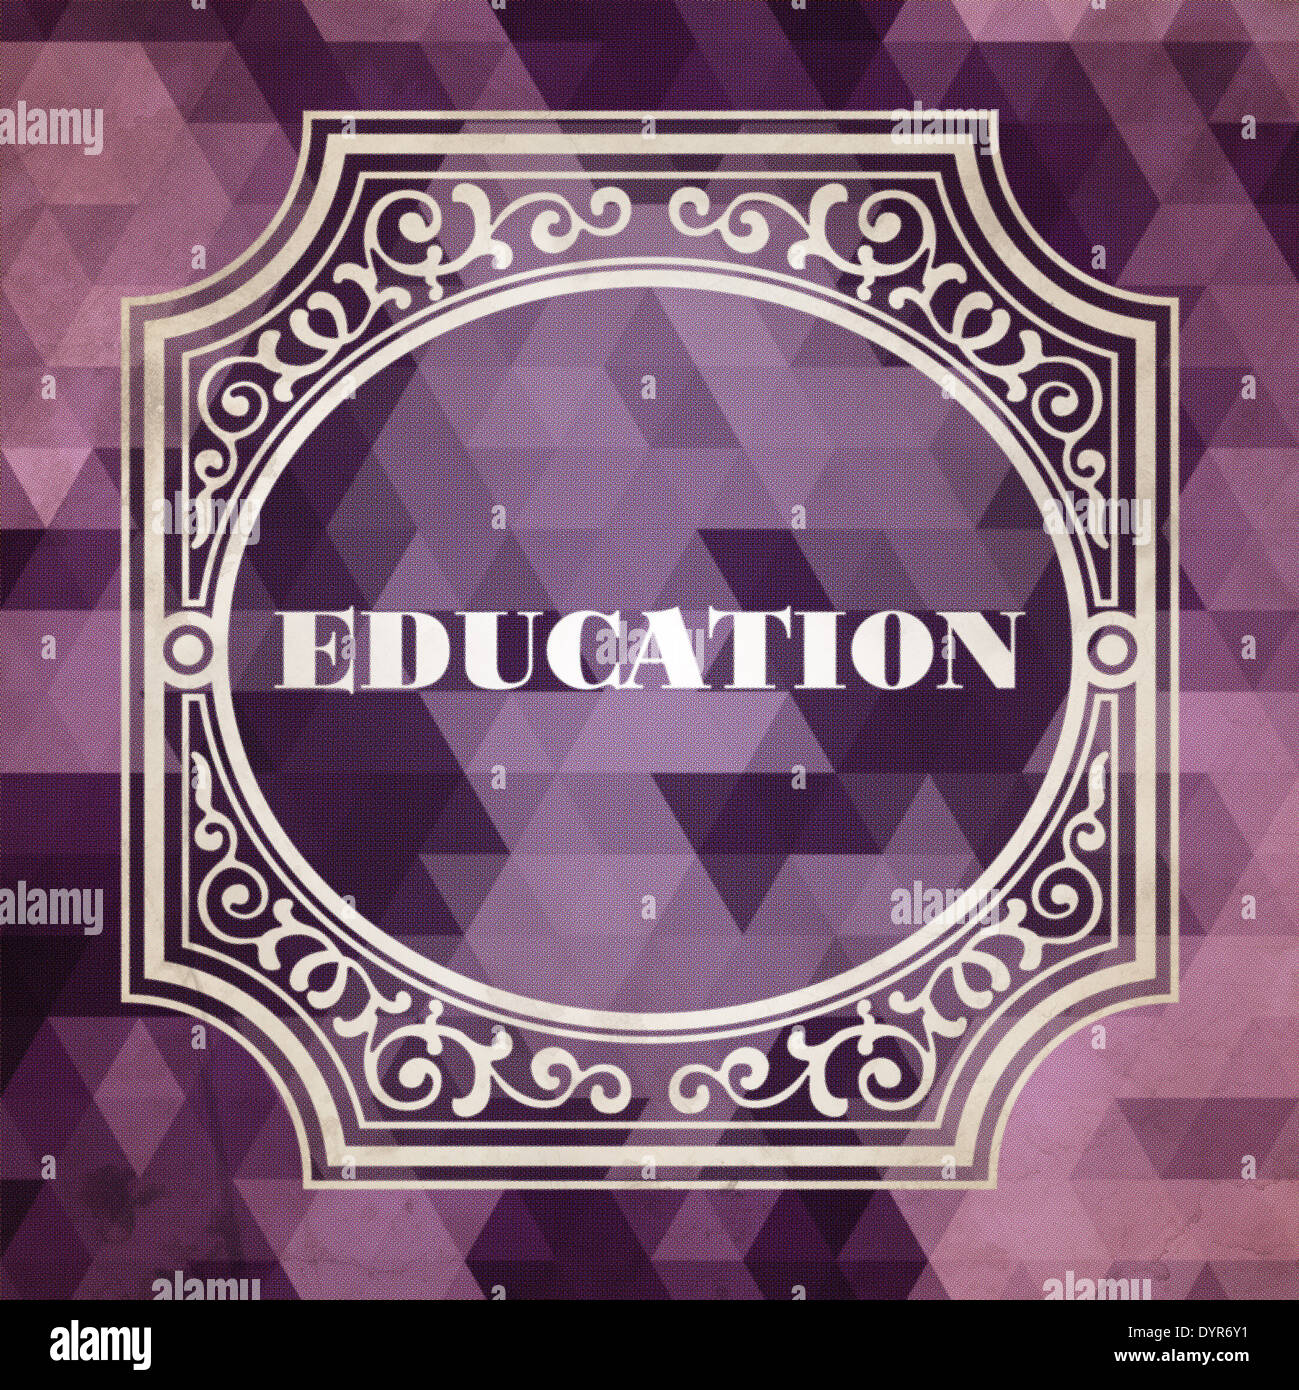 Education Concept. Vintage design. Purple Background made of Triangles. Stock Photo